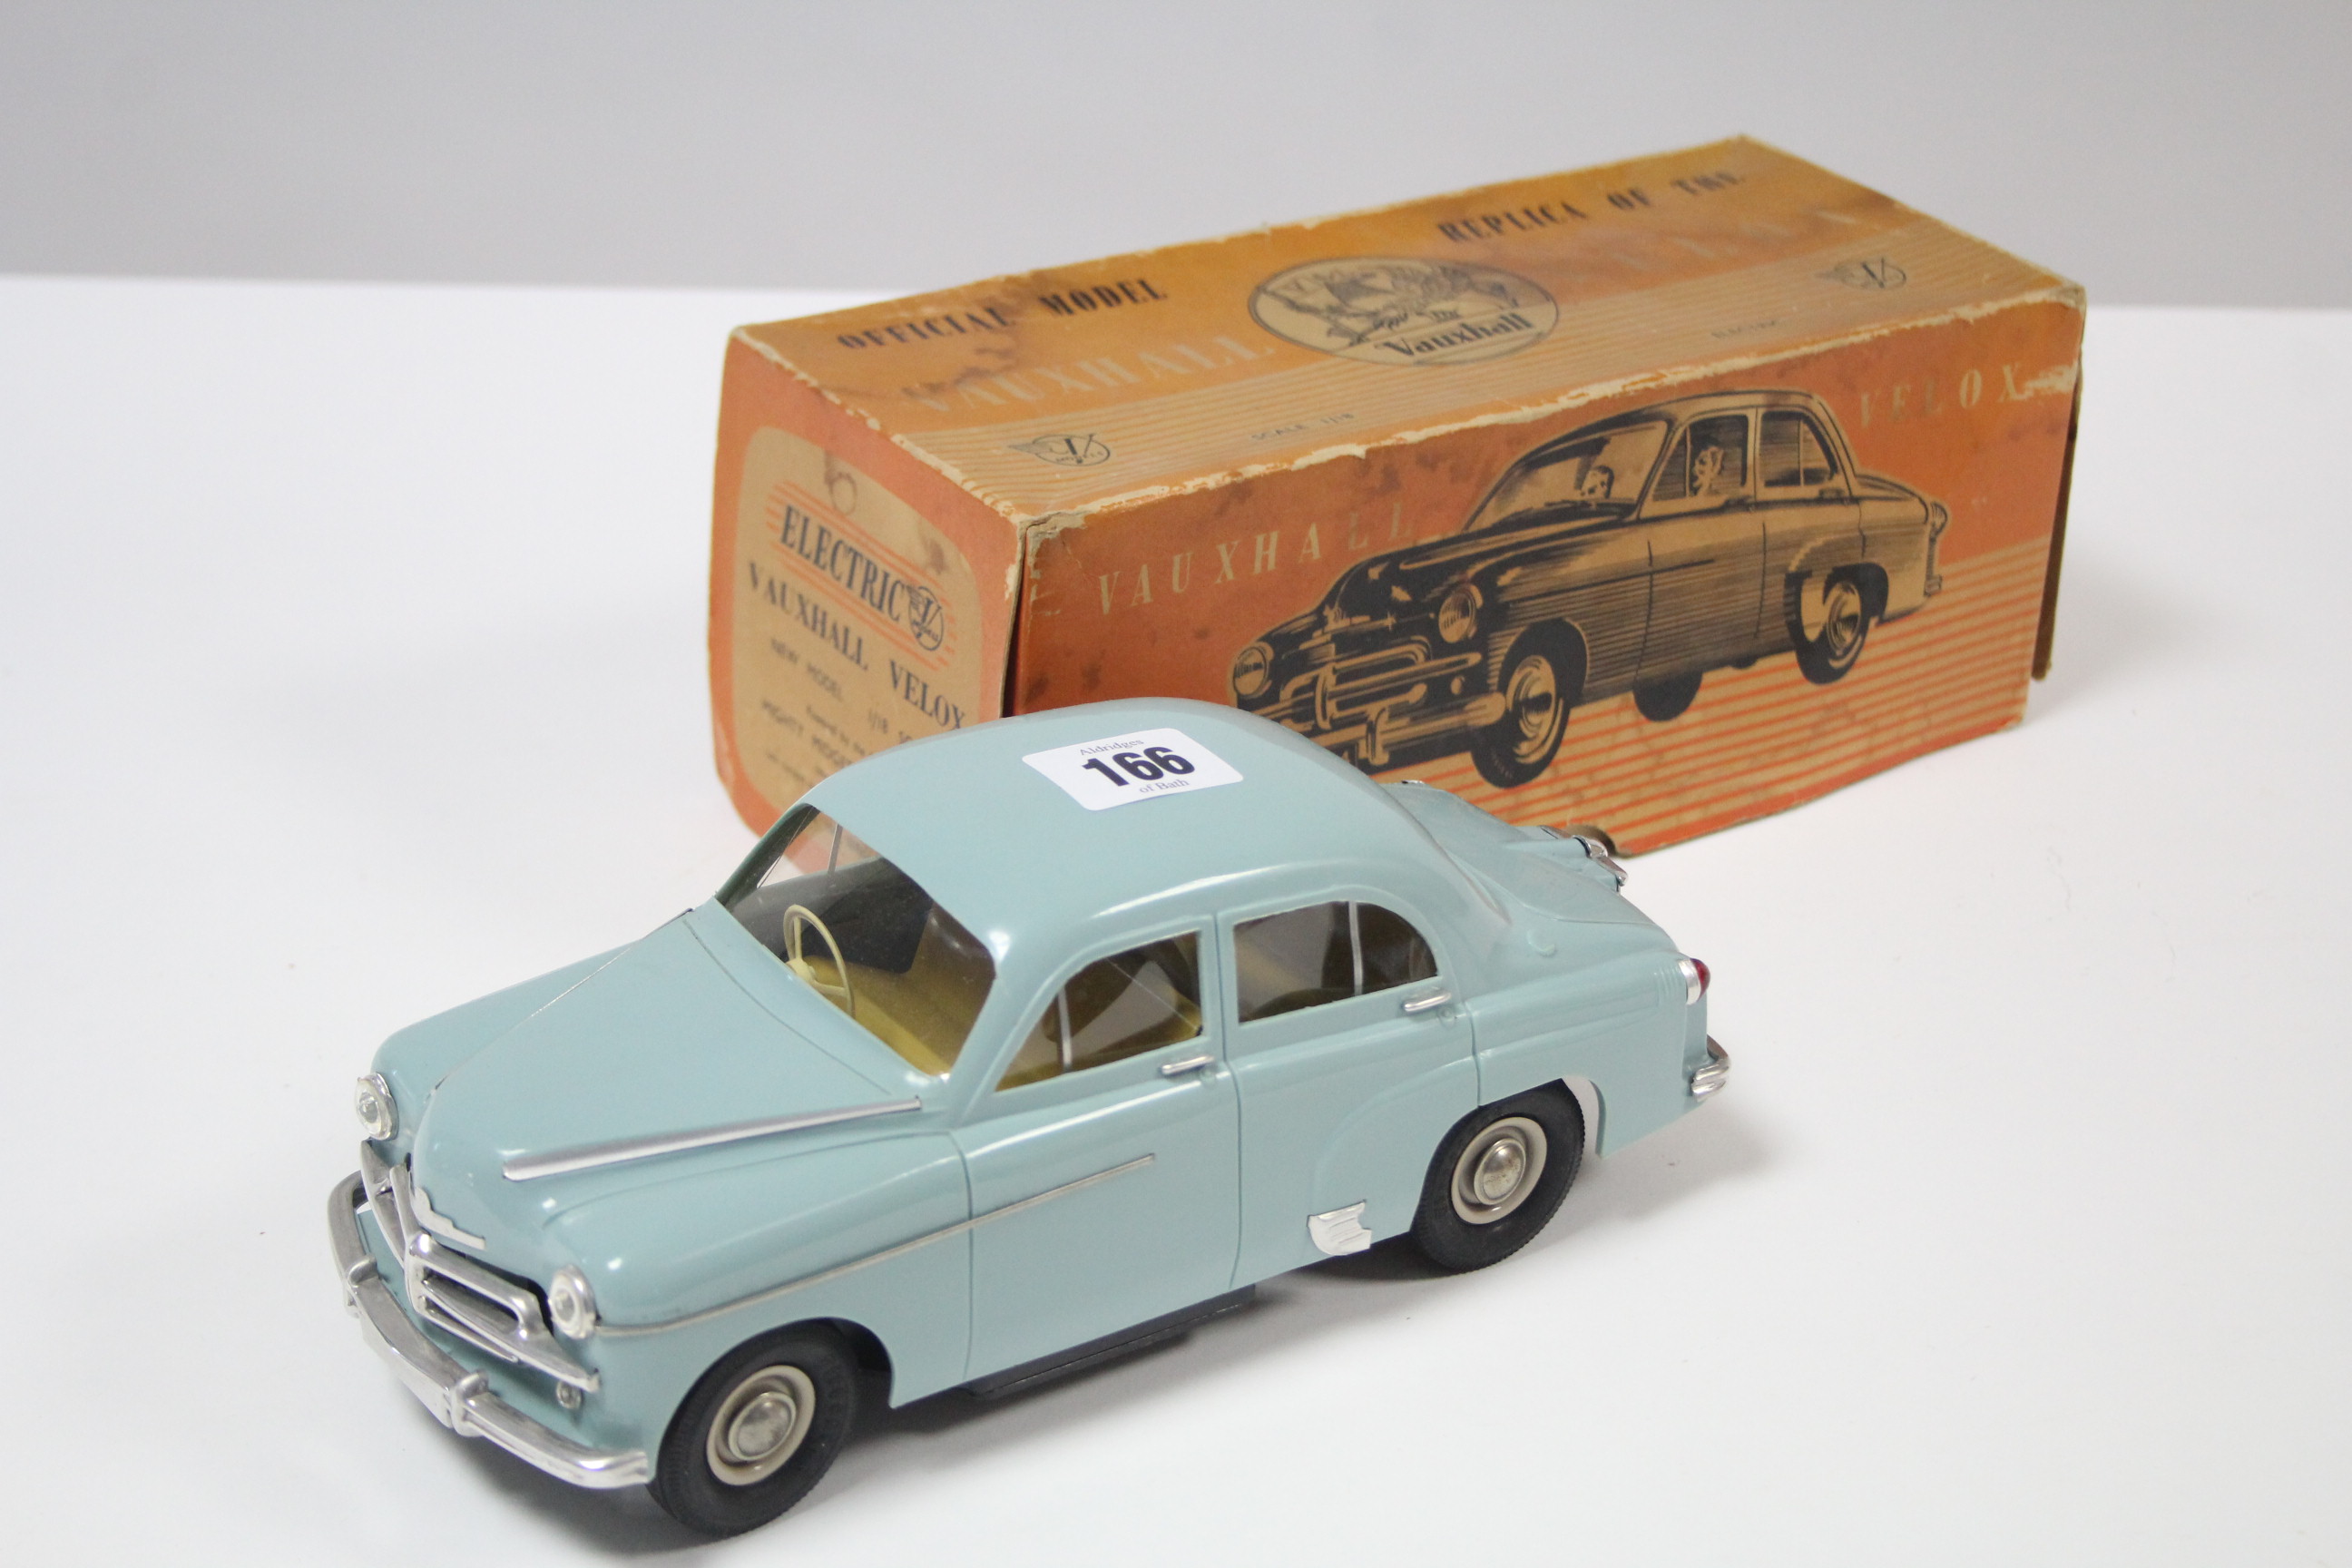 A Victory electric scale model of a Vauxhall Velox motor car, boxed.